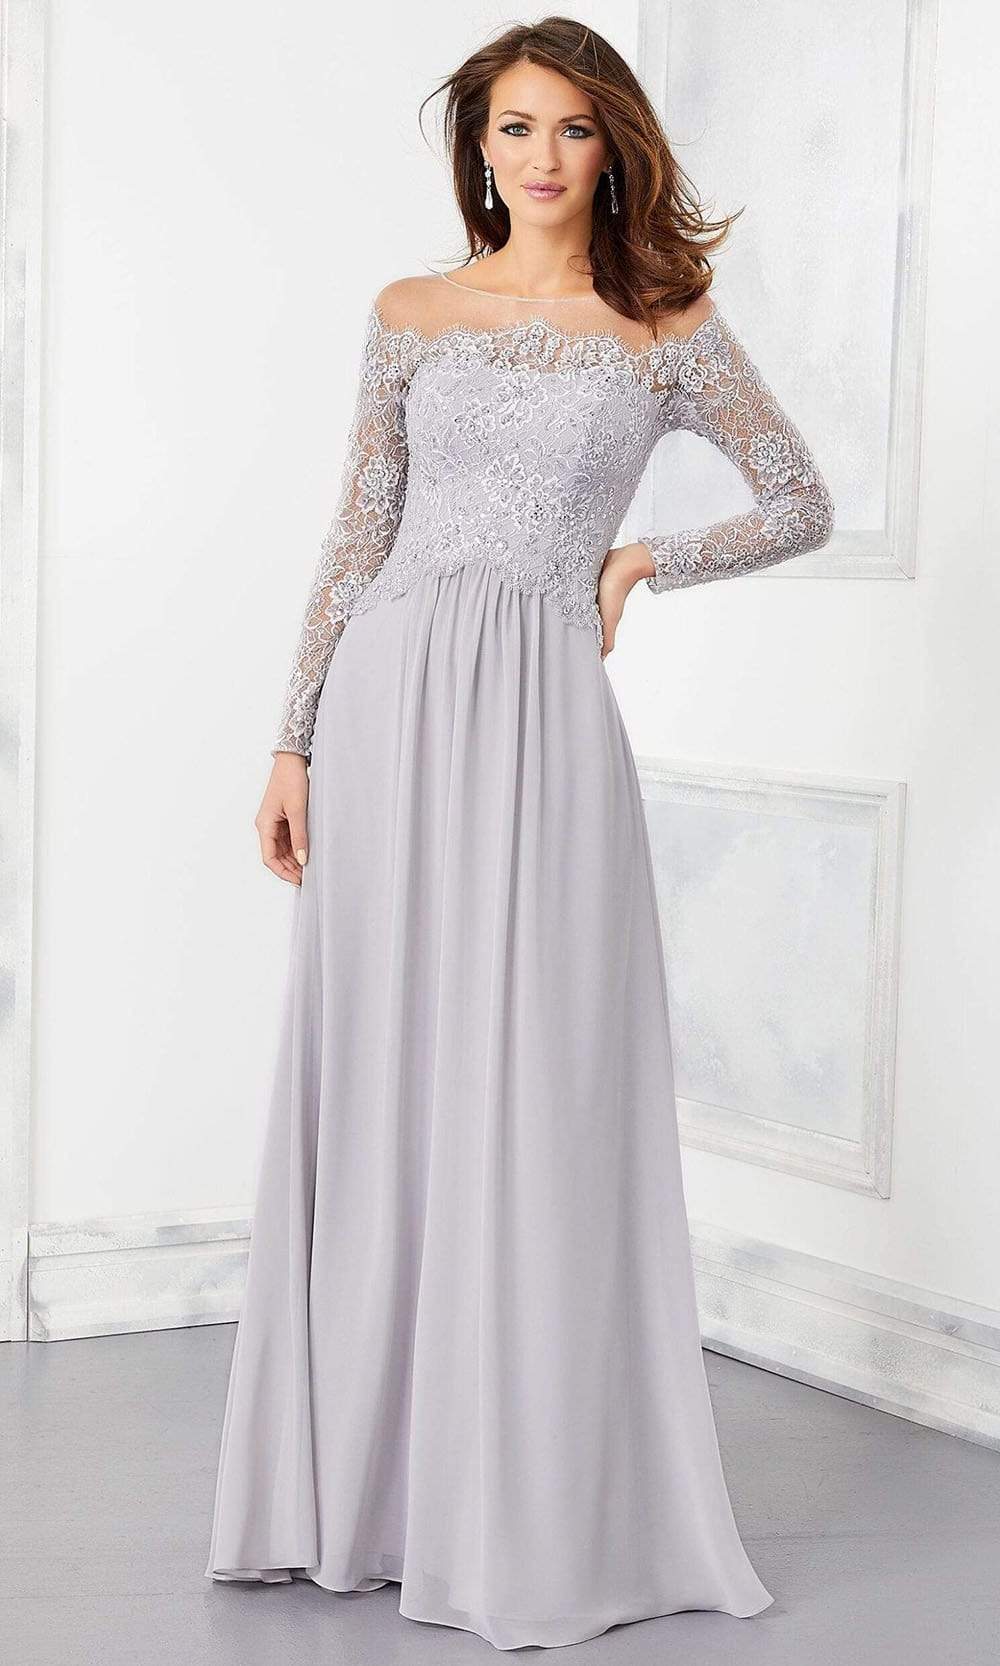 Image of Mori Lee - 72310 Crystal Beaded Illusion Lace Bodice Chiffon Gown